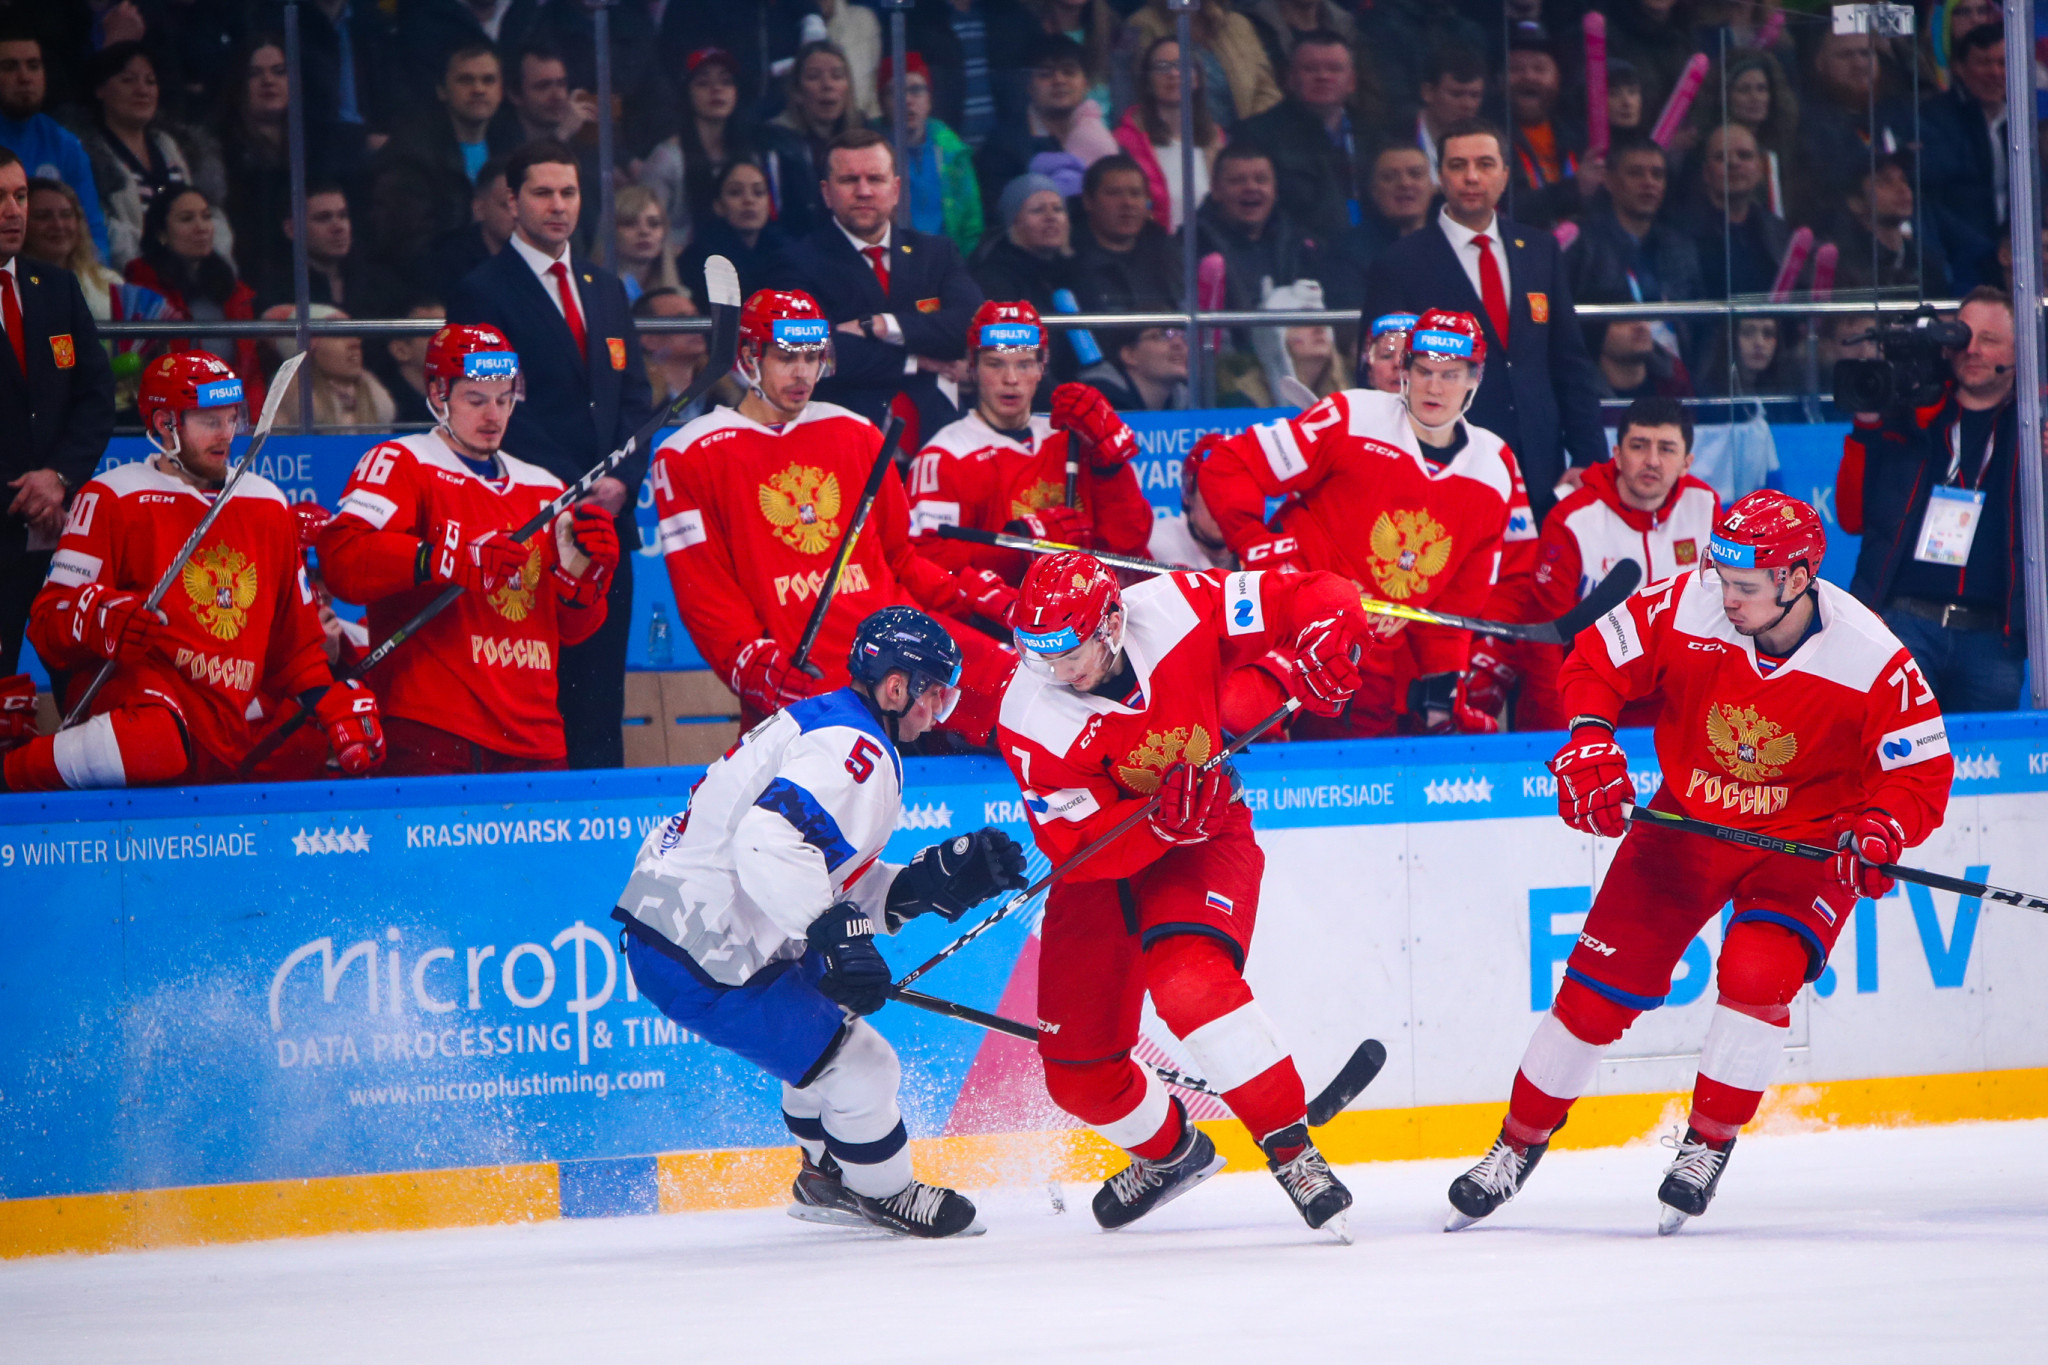 Before the Closing Ceremony, Russia played Slovakia in the final of the men's ice hockey ©Krasnoyarsk 2019